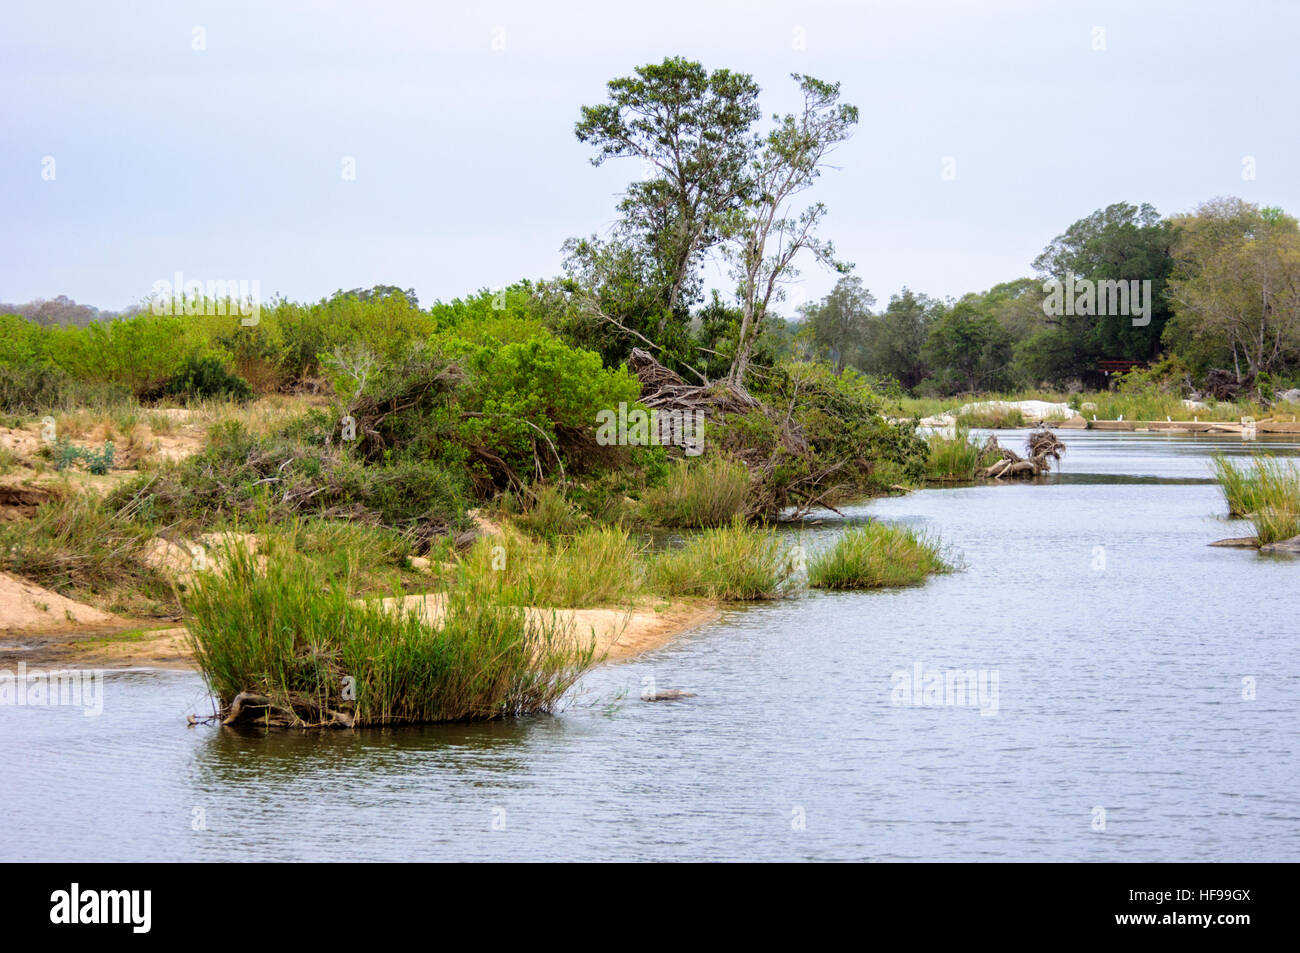 View of the Sand River, Sabi Sands Game Reserve, South Africa Stock Photo